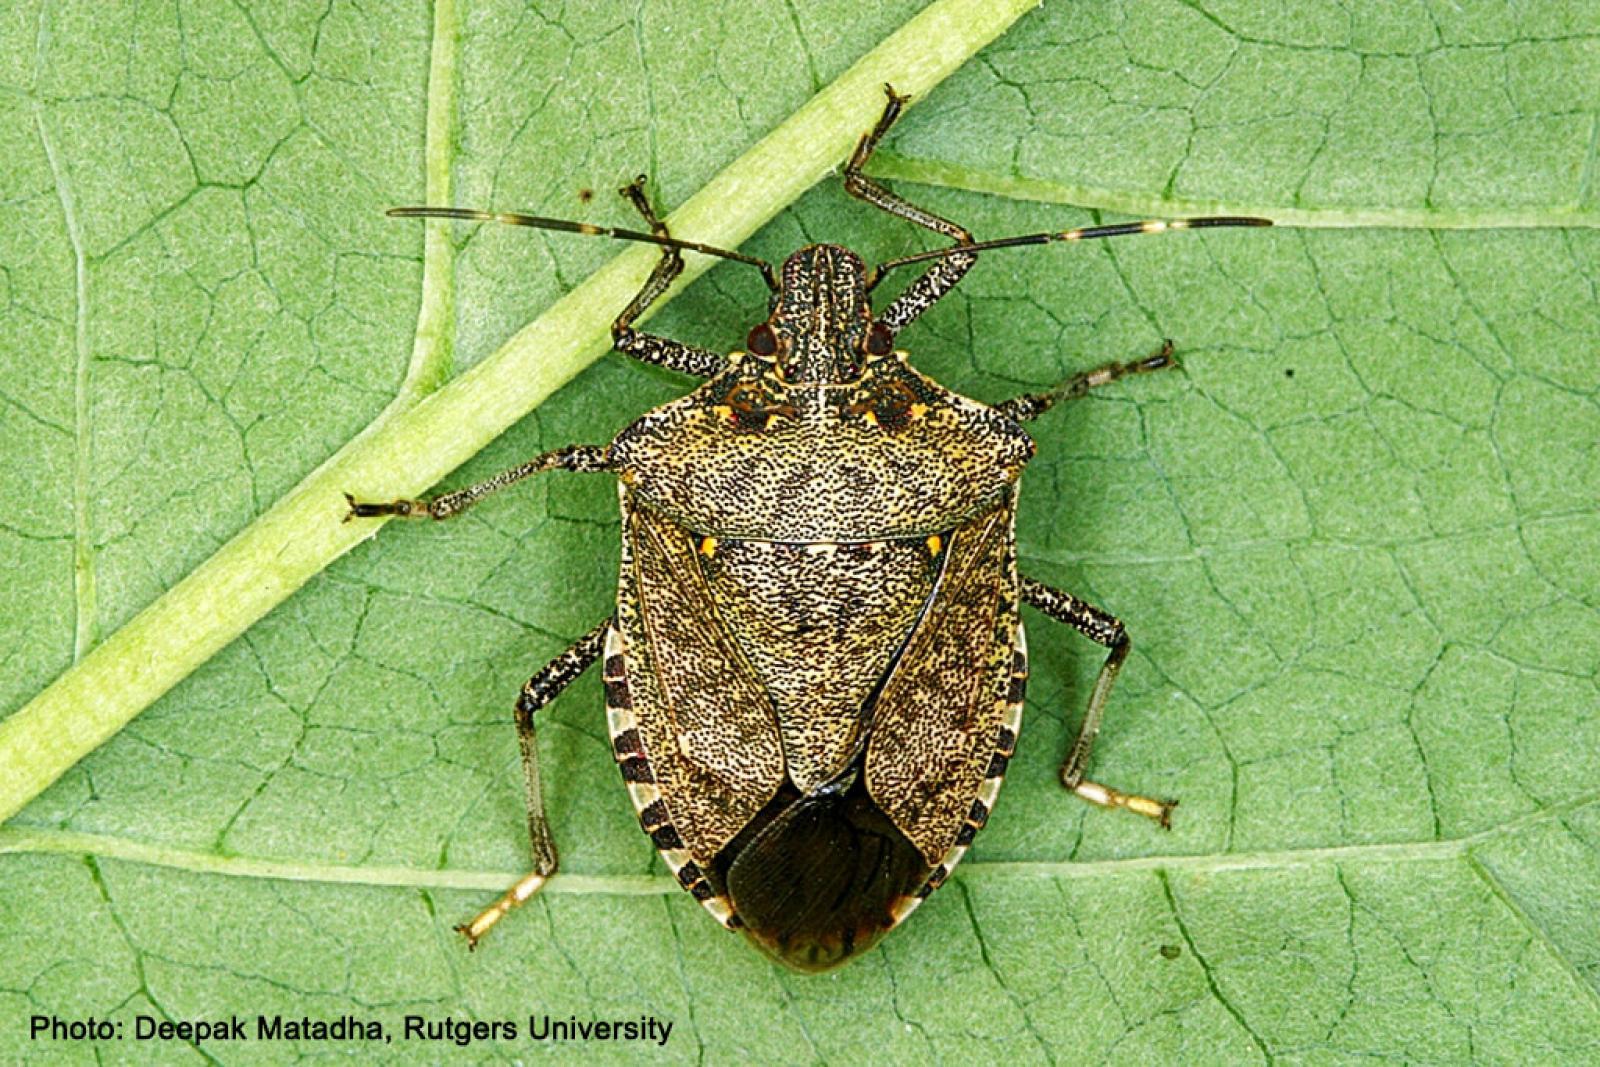 The brown marmorated stink bug really stinks!